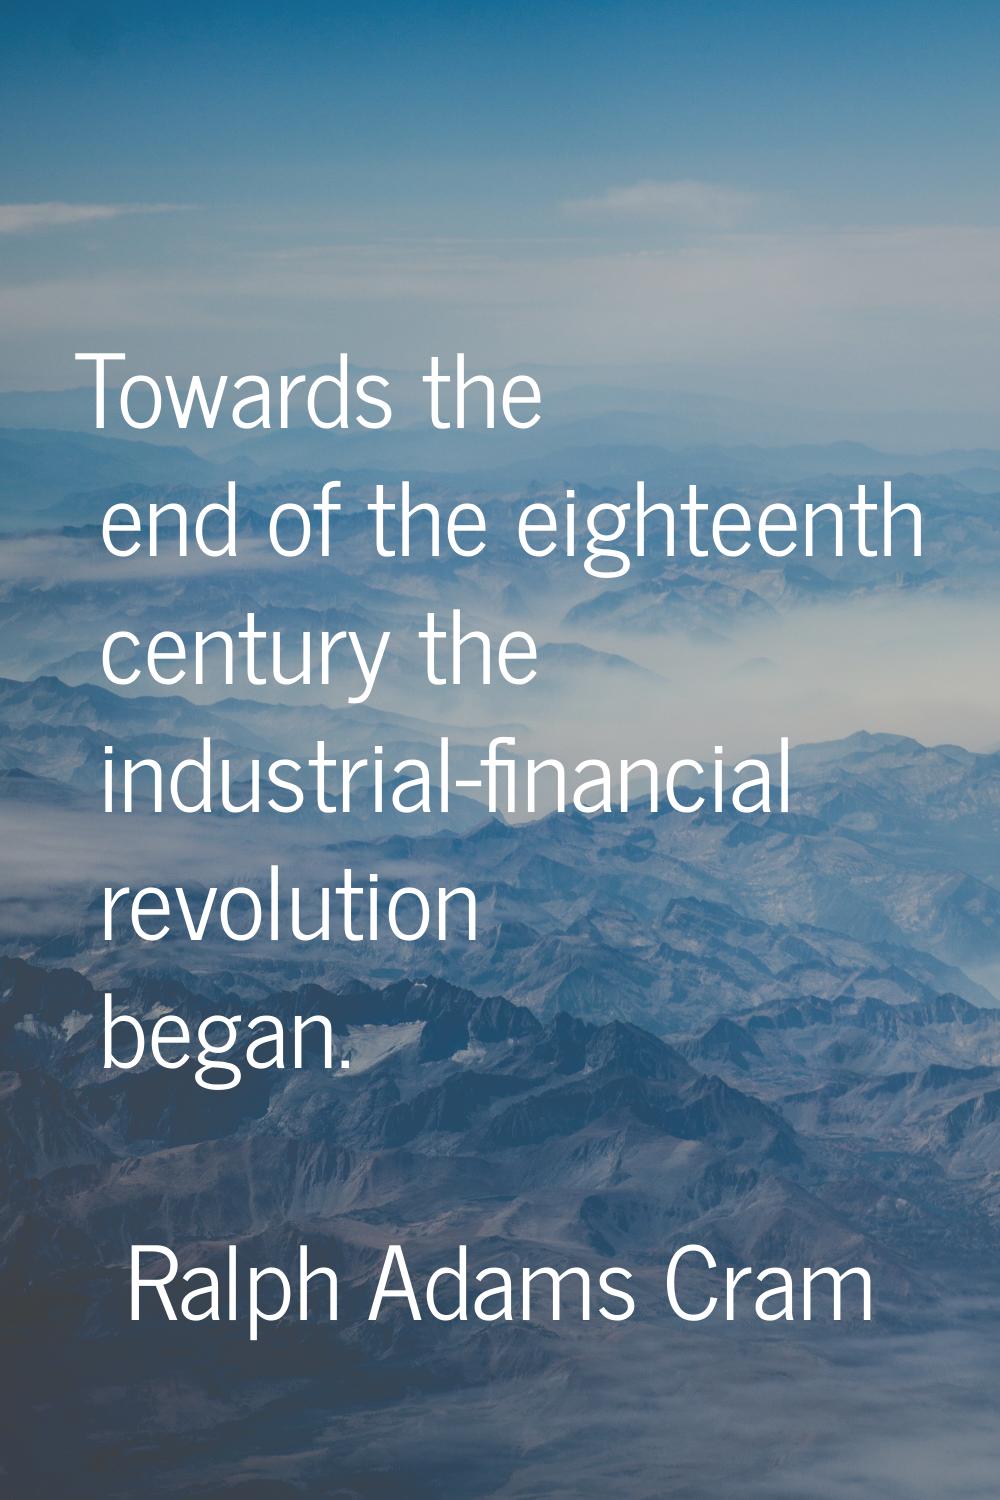 Towards the end of the eighteenth century the industrial-financial revolution began.